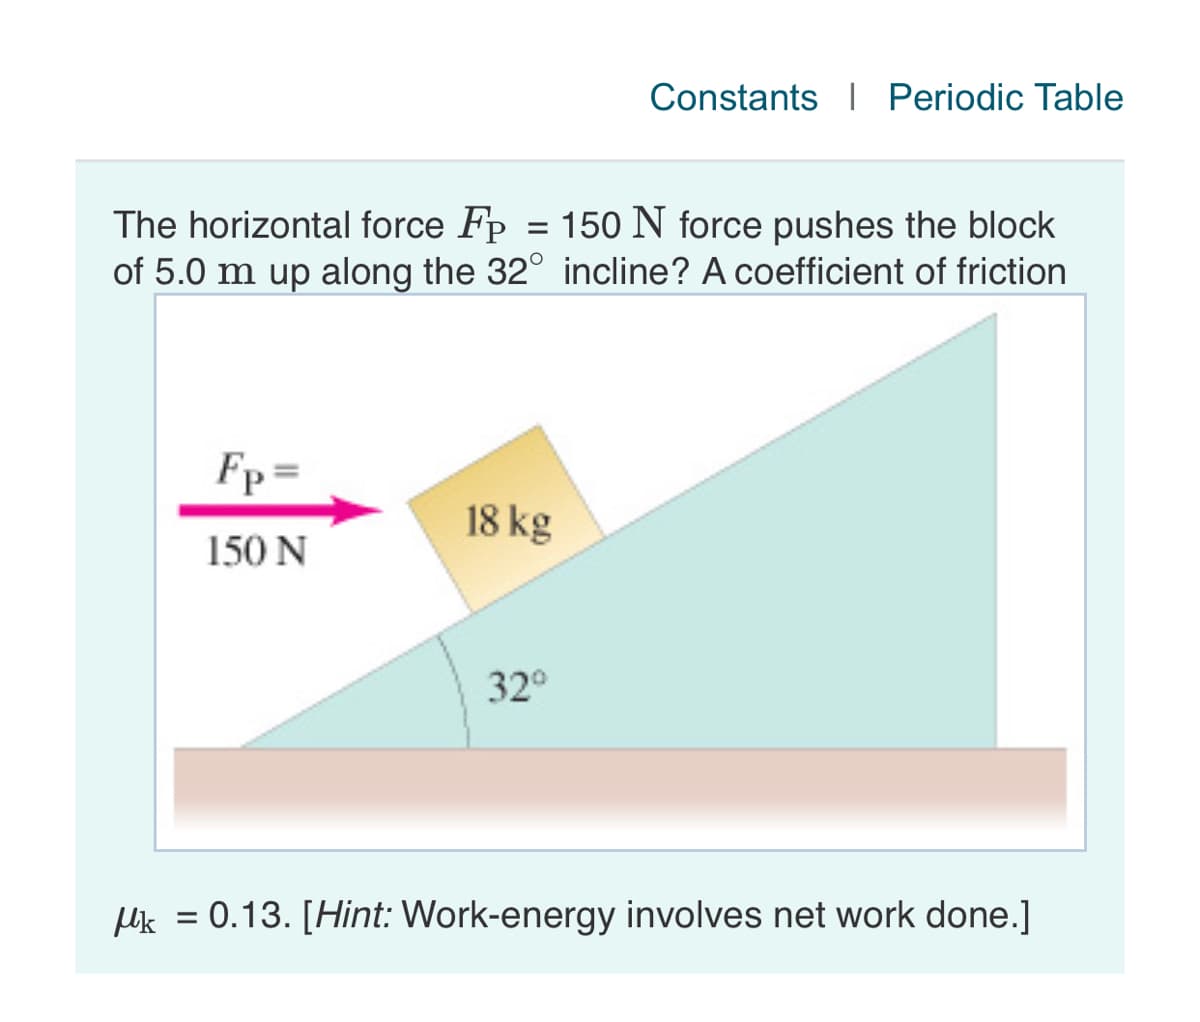 Constants I Periodic Table
The horizontal force Fp = 150 N force pushes the block
of 5.0 m up along the 32° incline? A coefficient of friction
Fp=
18 kg
150 N
32°
plik = 0.13. [Hint: Work-energy involves net work done.]
